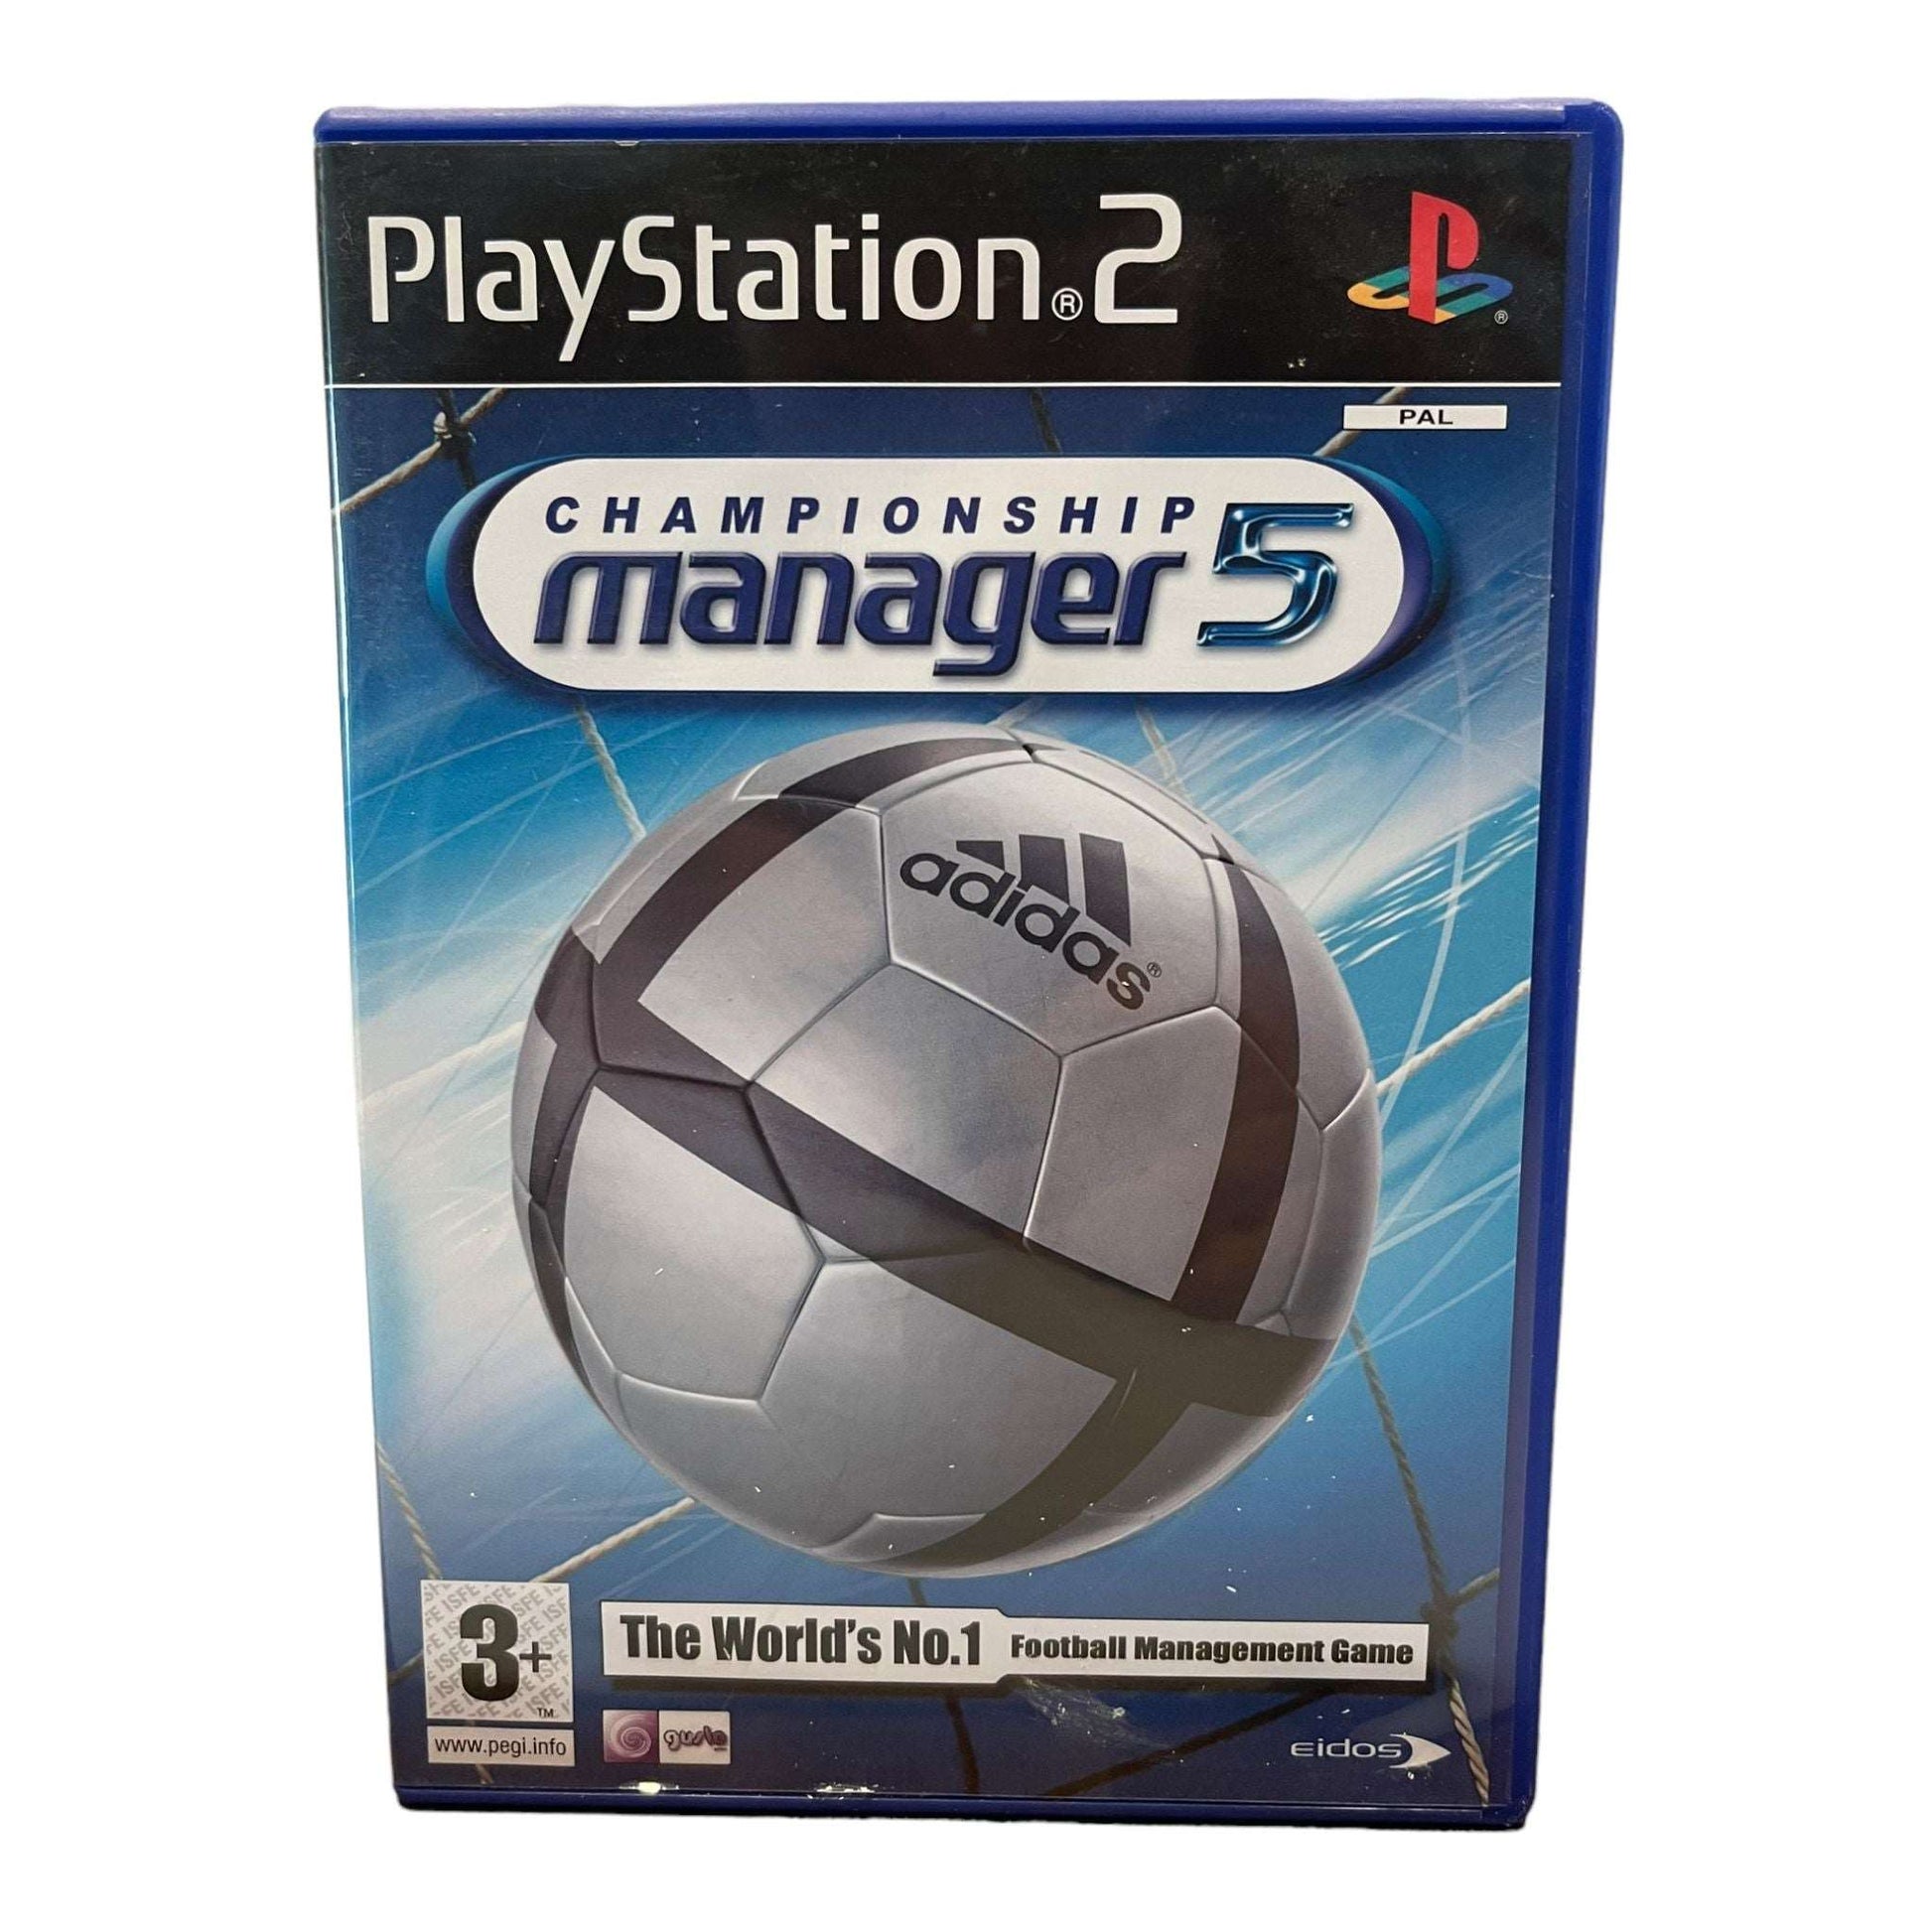 Championship Manager 5 - PS2